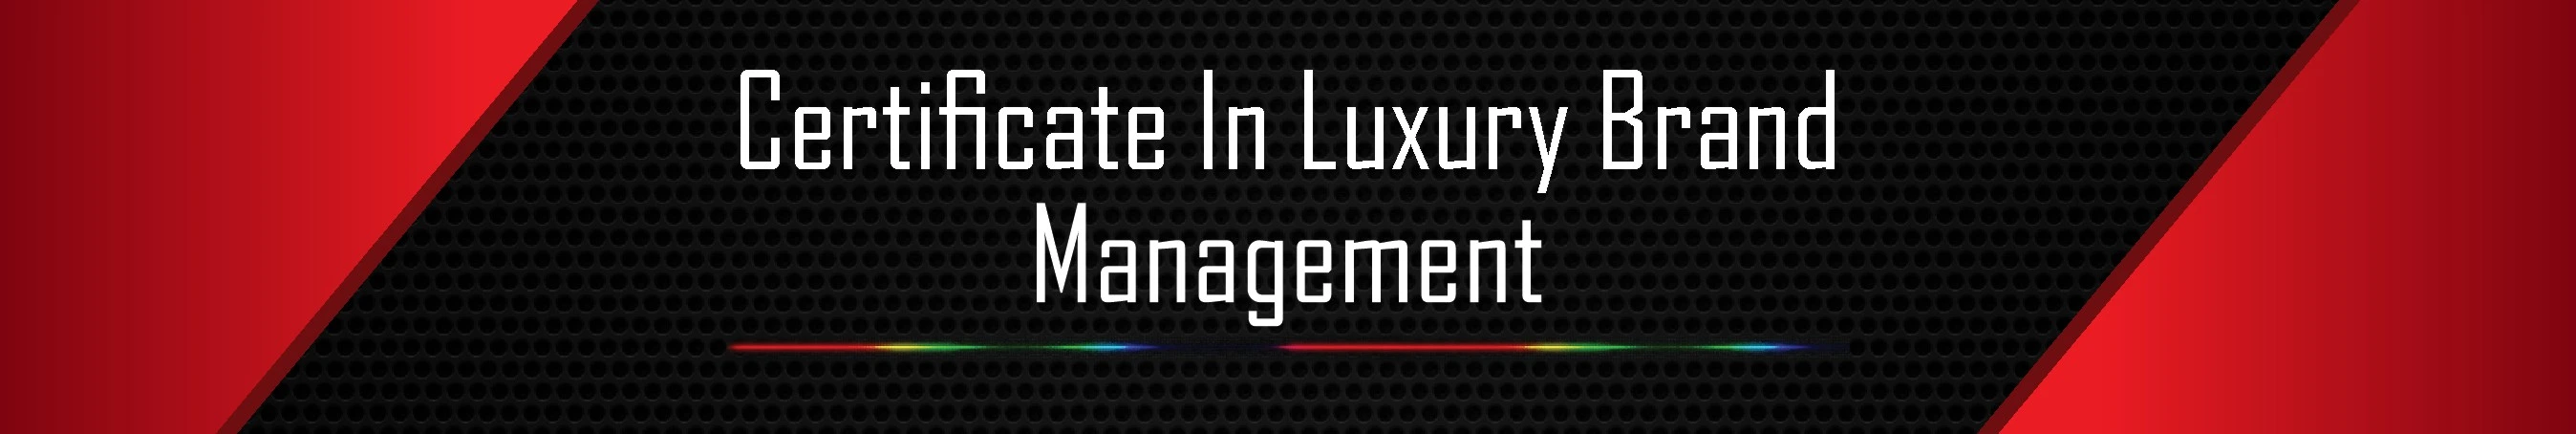 Certificate in fashion luxury brand management